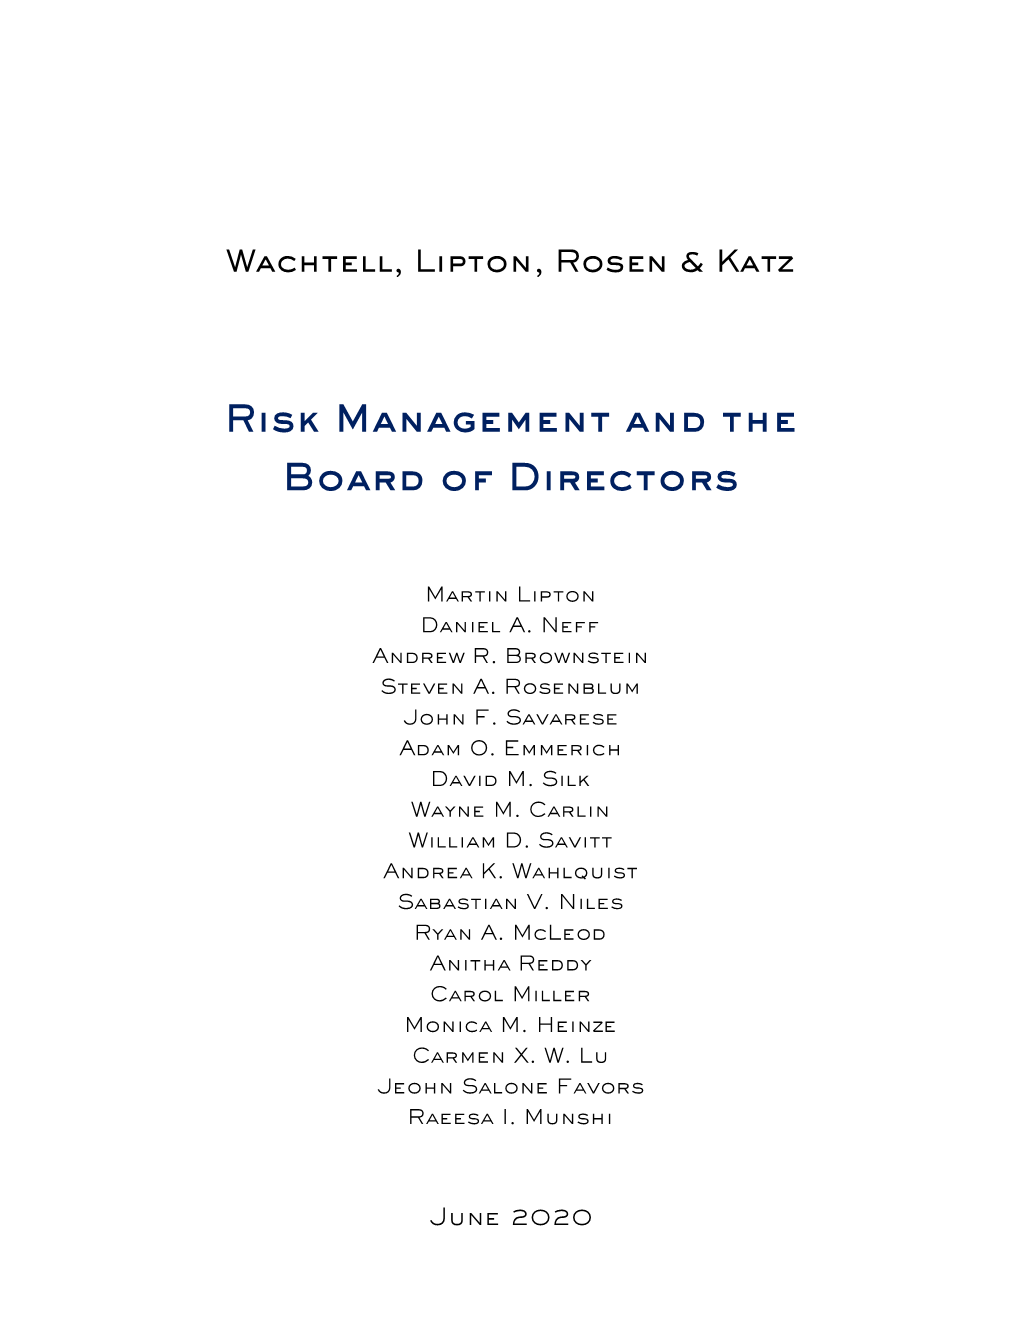 Risk Management and the Board of Directors